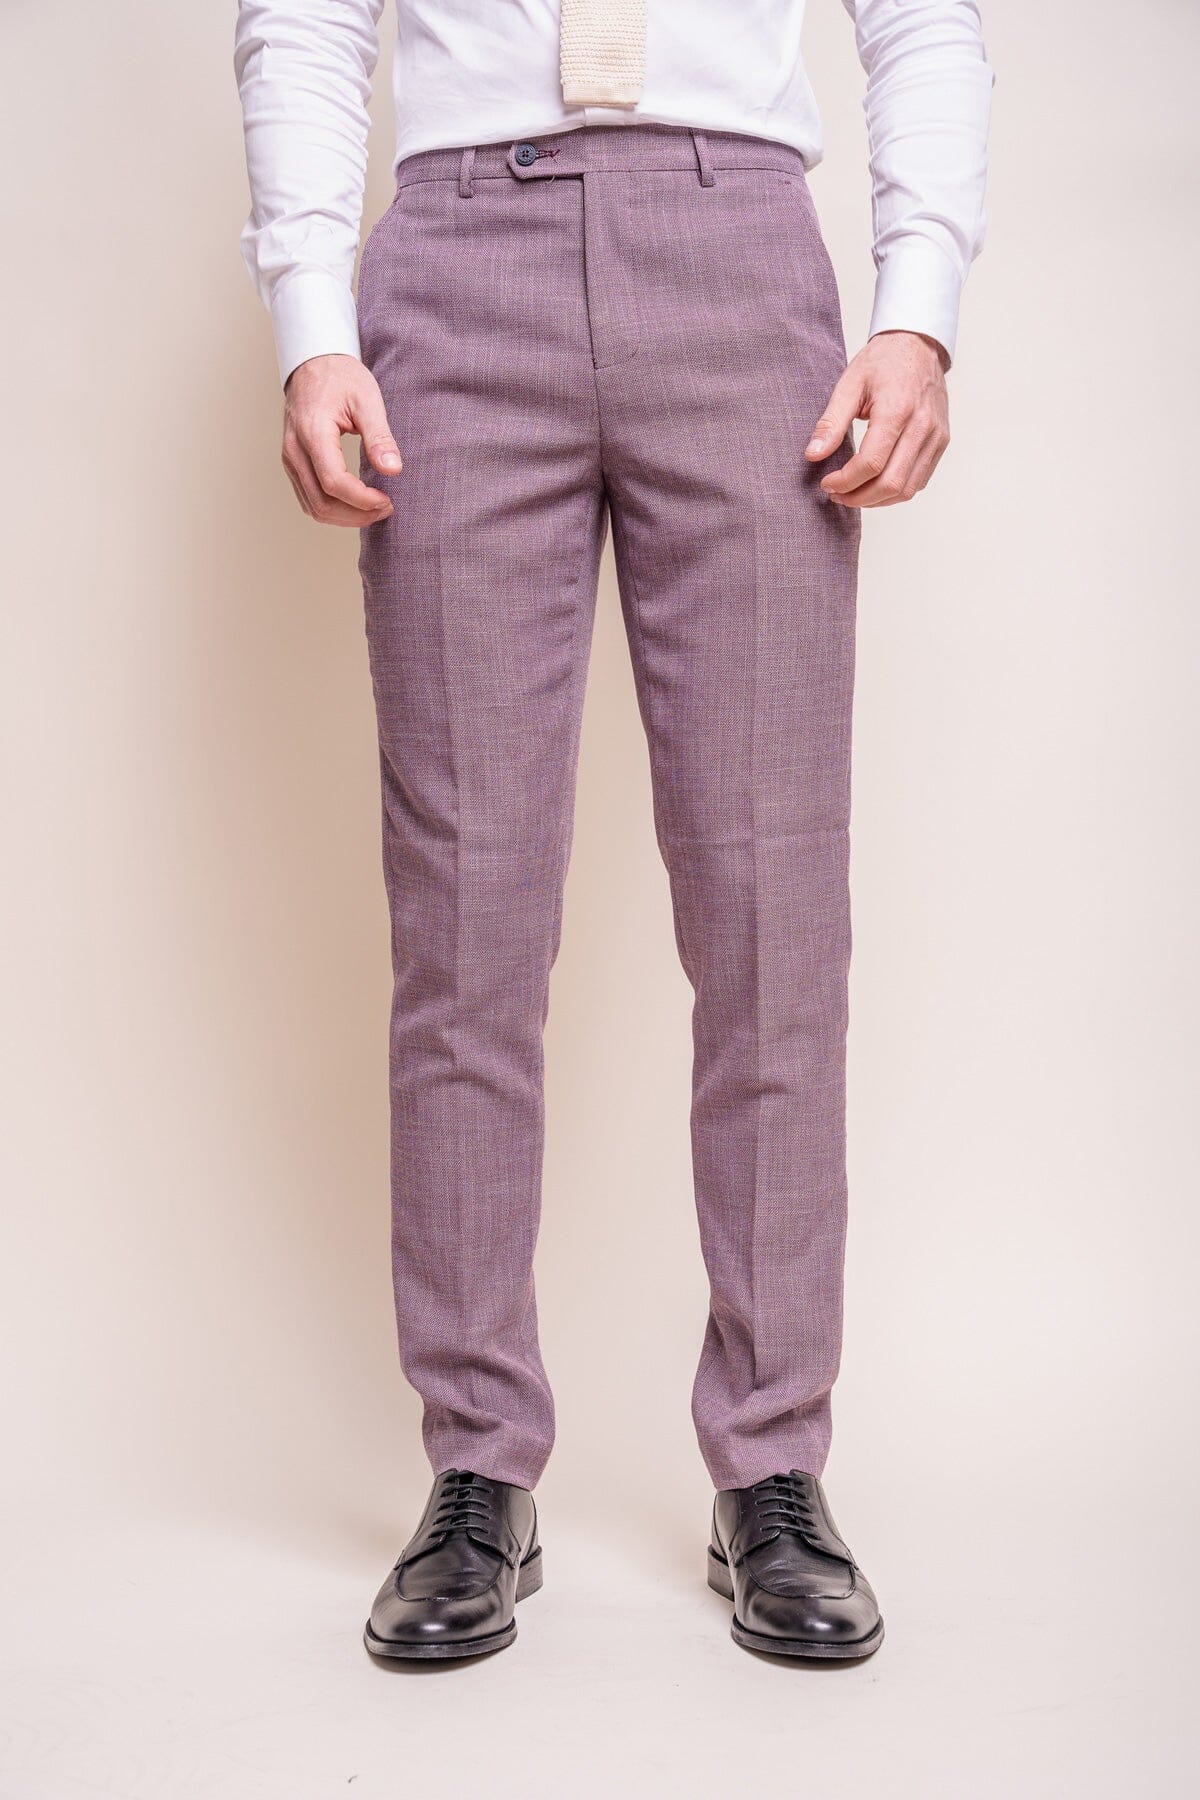 Miami Lilac Trousers - Trousers - 28R 